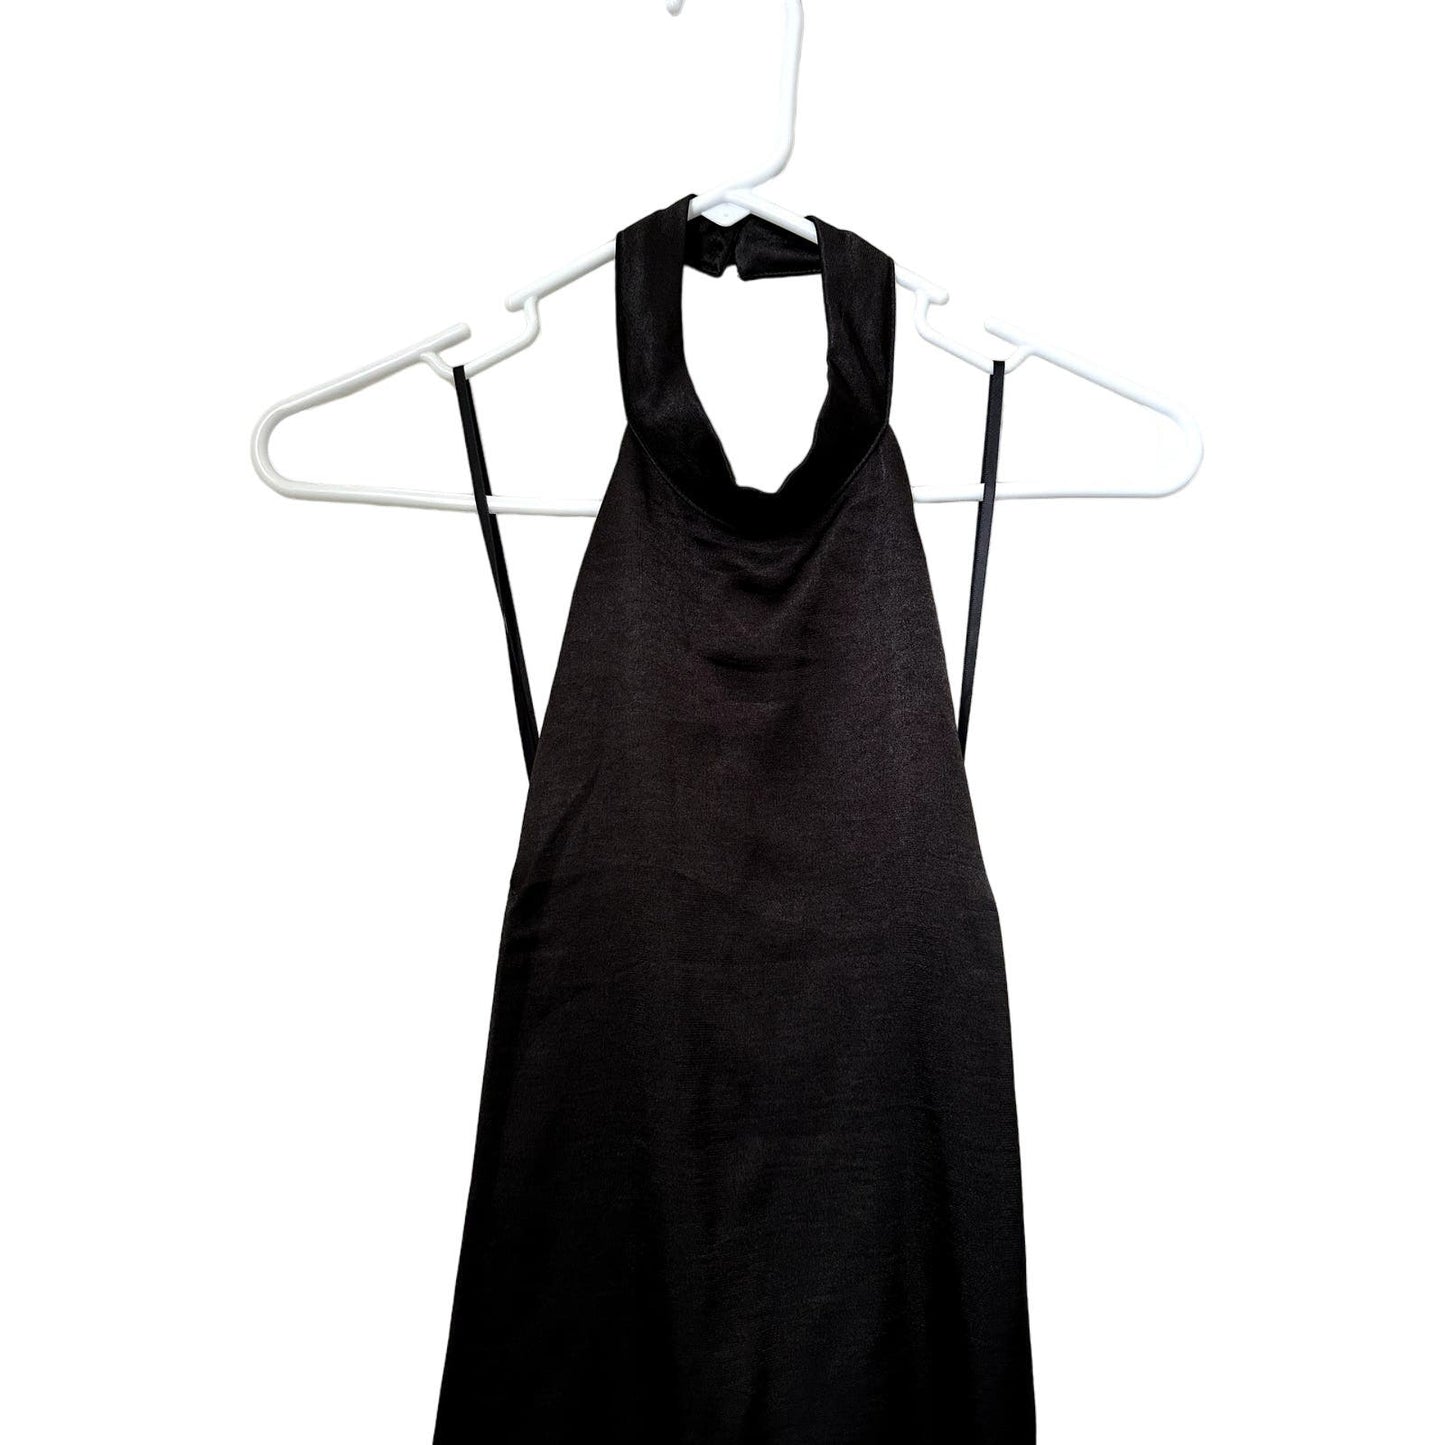 Urban Outfitters Black Satin Slip Dress, Size S